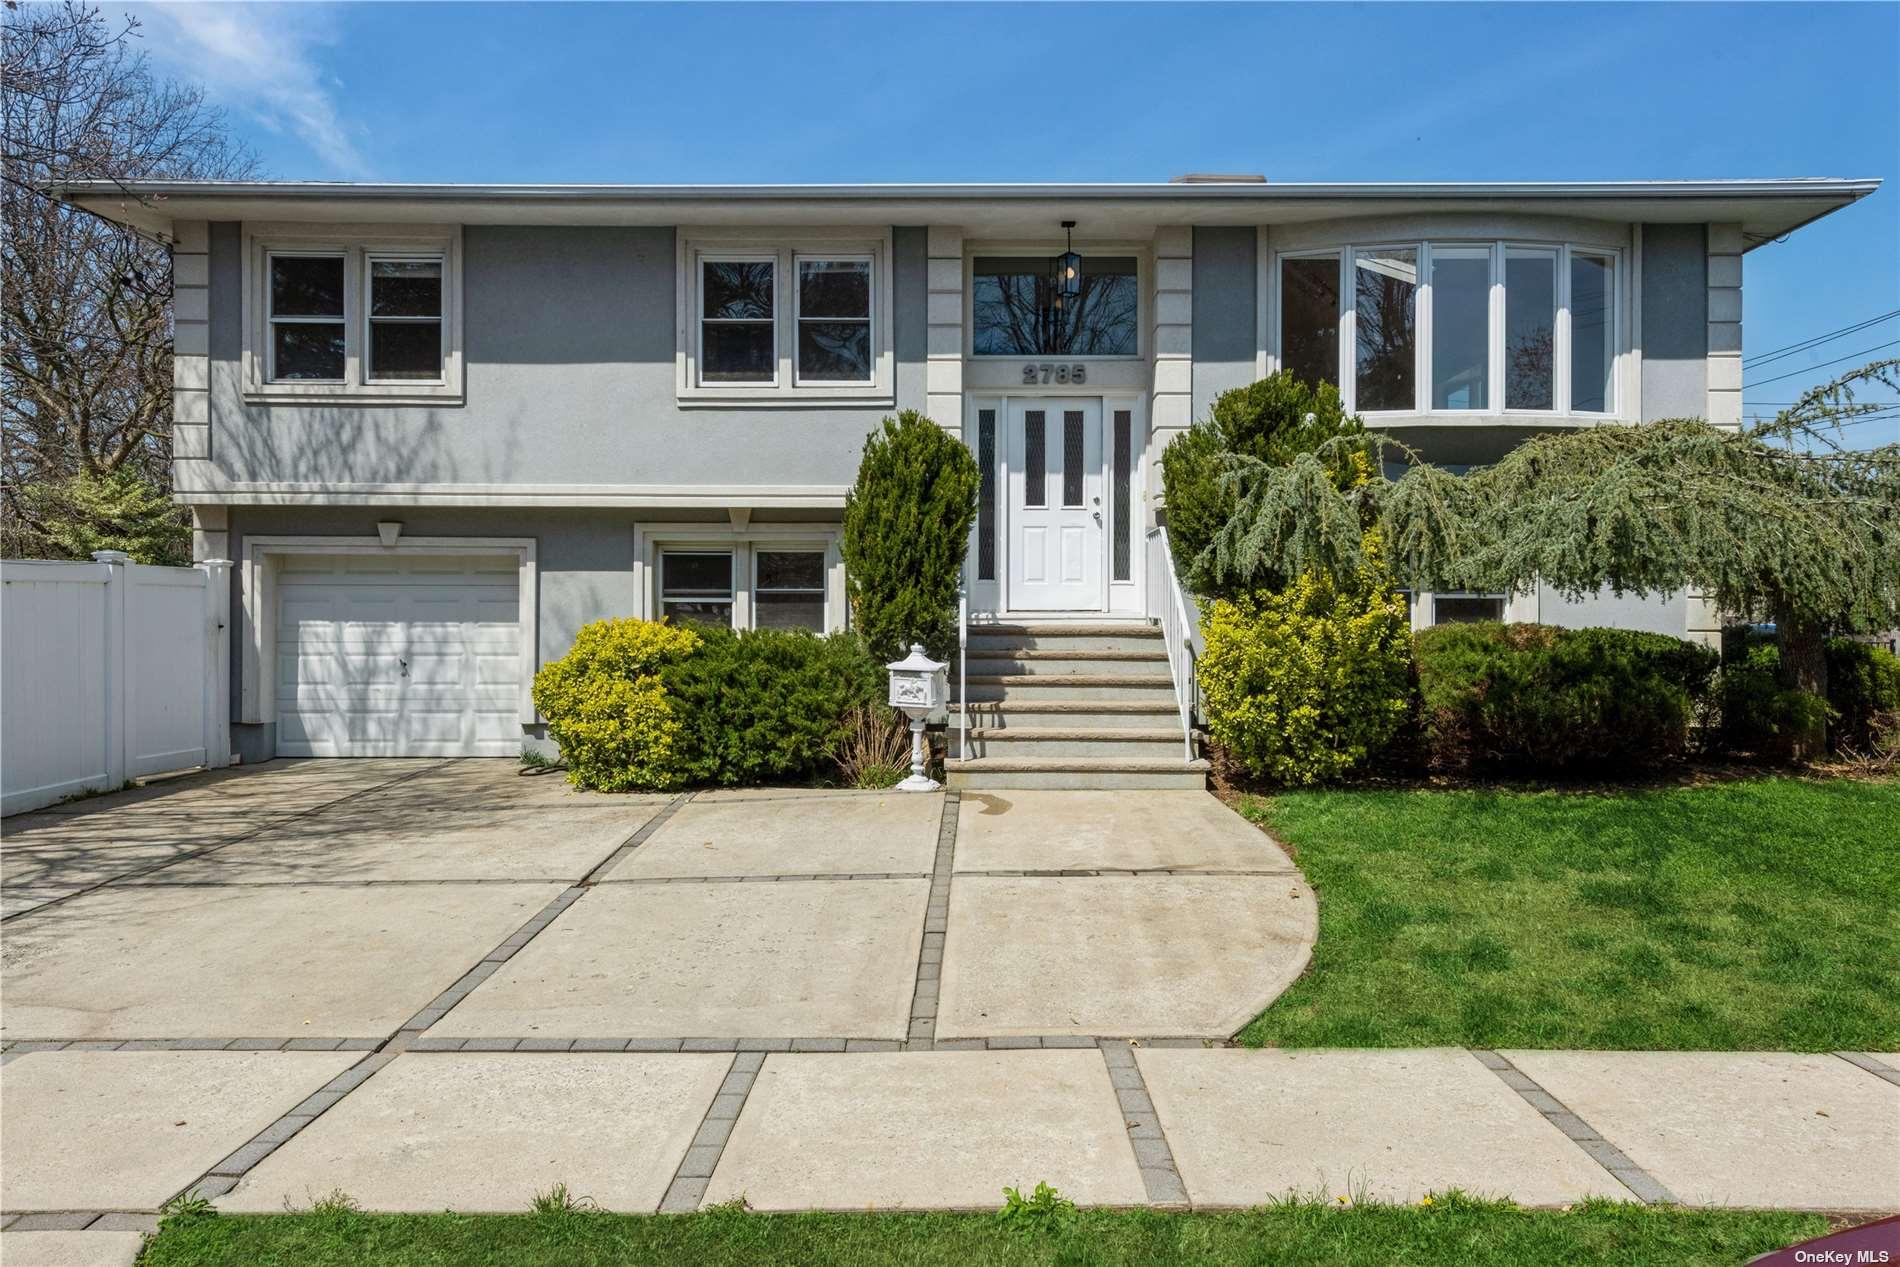 2785 Oxford Place in Long Island, East Meadow, NY 11554